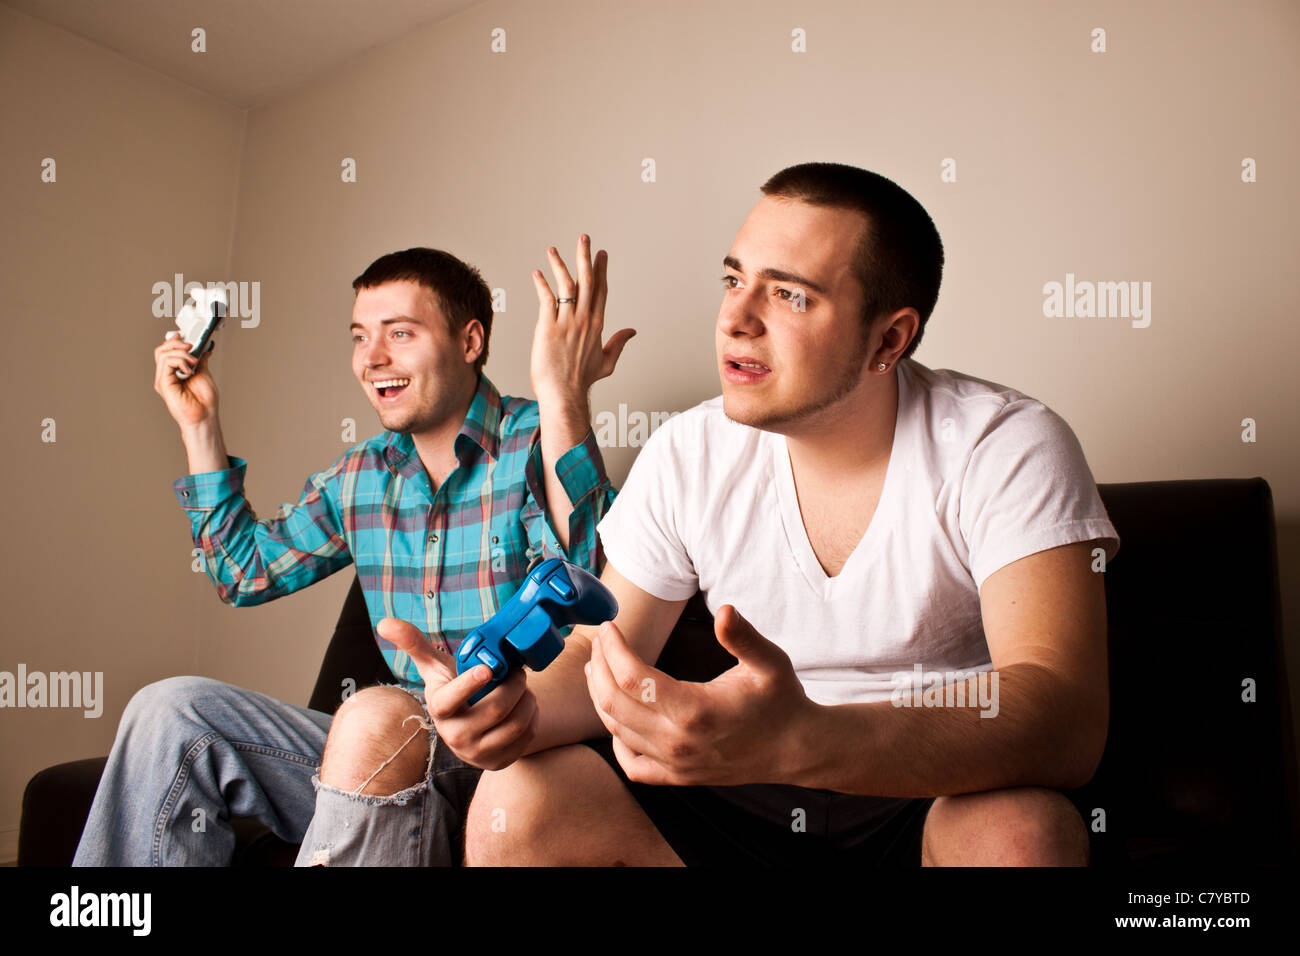 One guy loses to another while playing a video game Stock Photo